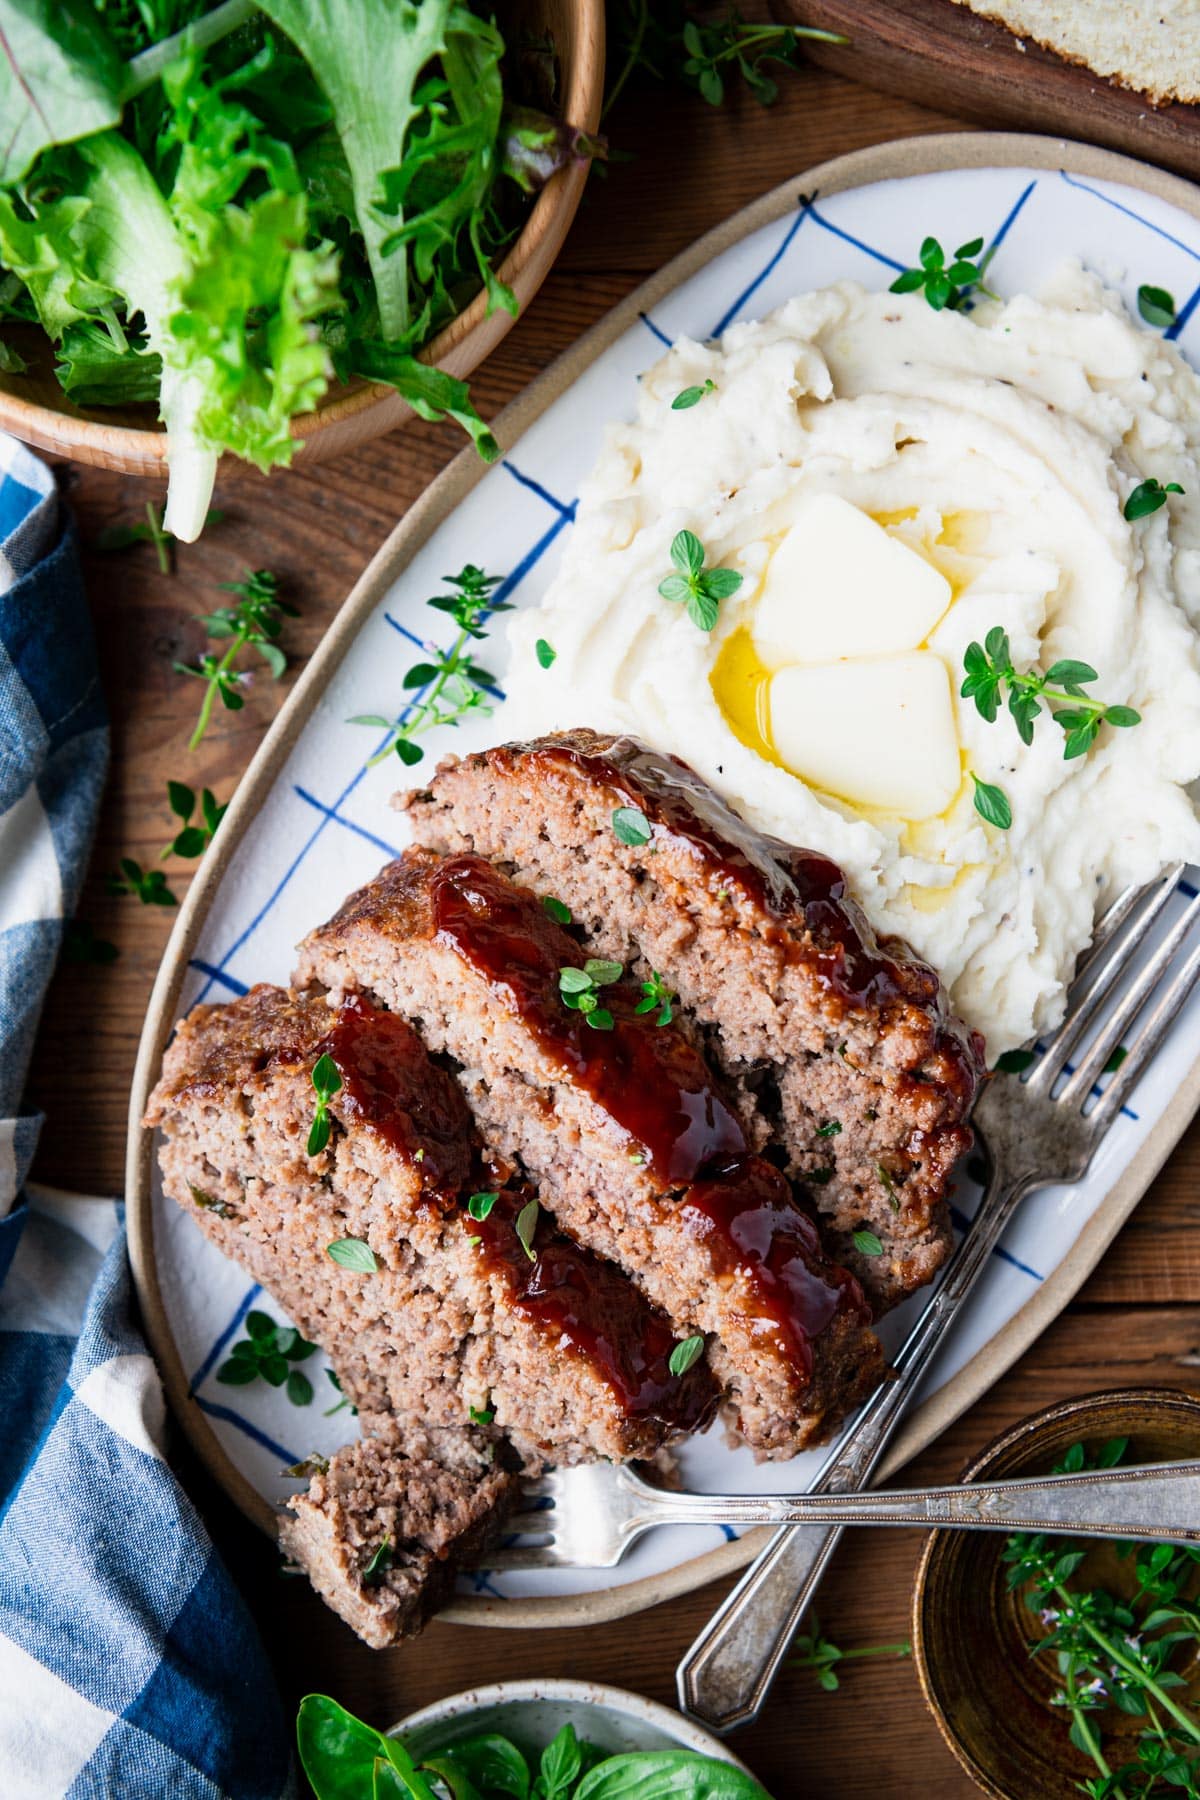 Overhead image of barbecue meatloaf on a platter with mashed potatoes and a side salad.